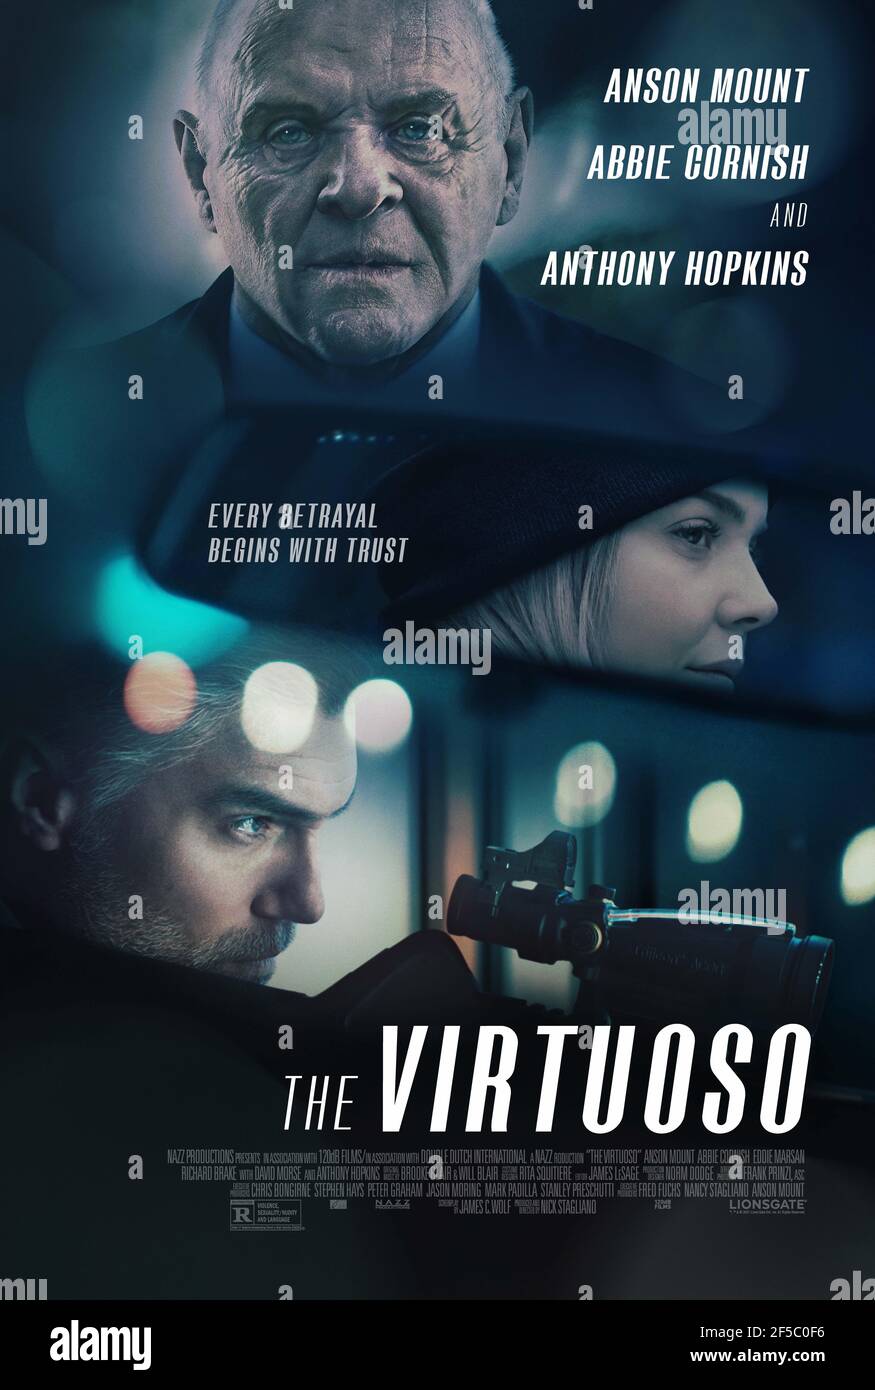 RELEASE DATE: 2021 TITLE: The Virtuoso STUDIO: Pelican Films DIRECTOR: Nick Stagliano PLOT: A lonesome stranger, secure, nerves of steel, must track down and kill a rogue Hitman to satisfy an outstanding debt. But the only information he's been given is a time and location where to find his quarry STARRING: ANTHONY HOPKINS as The Mentor poster art. (Credit Image: © Pelican Films/Entertainment Pictures) Stock Photo